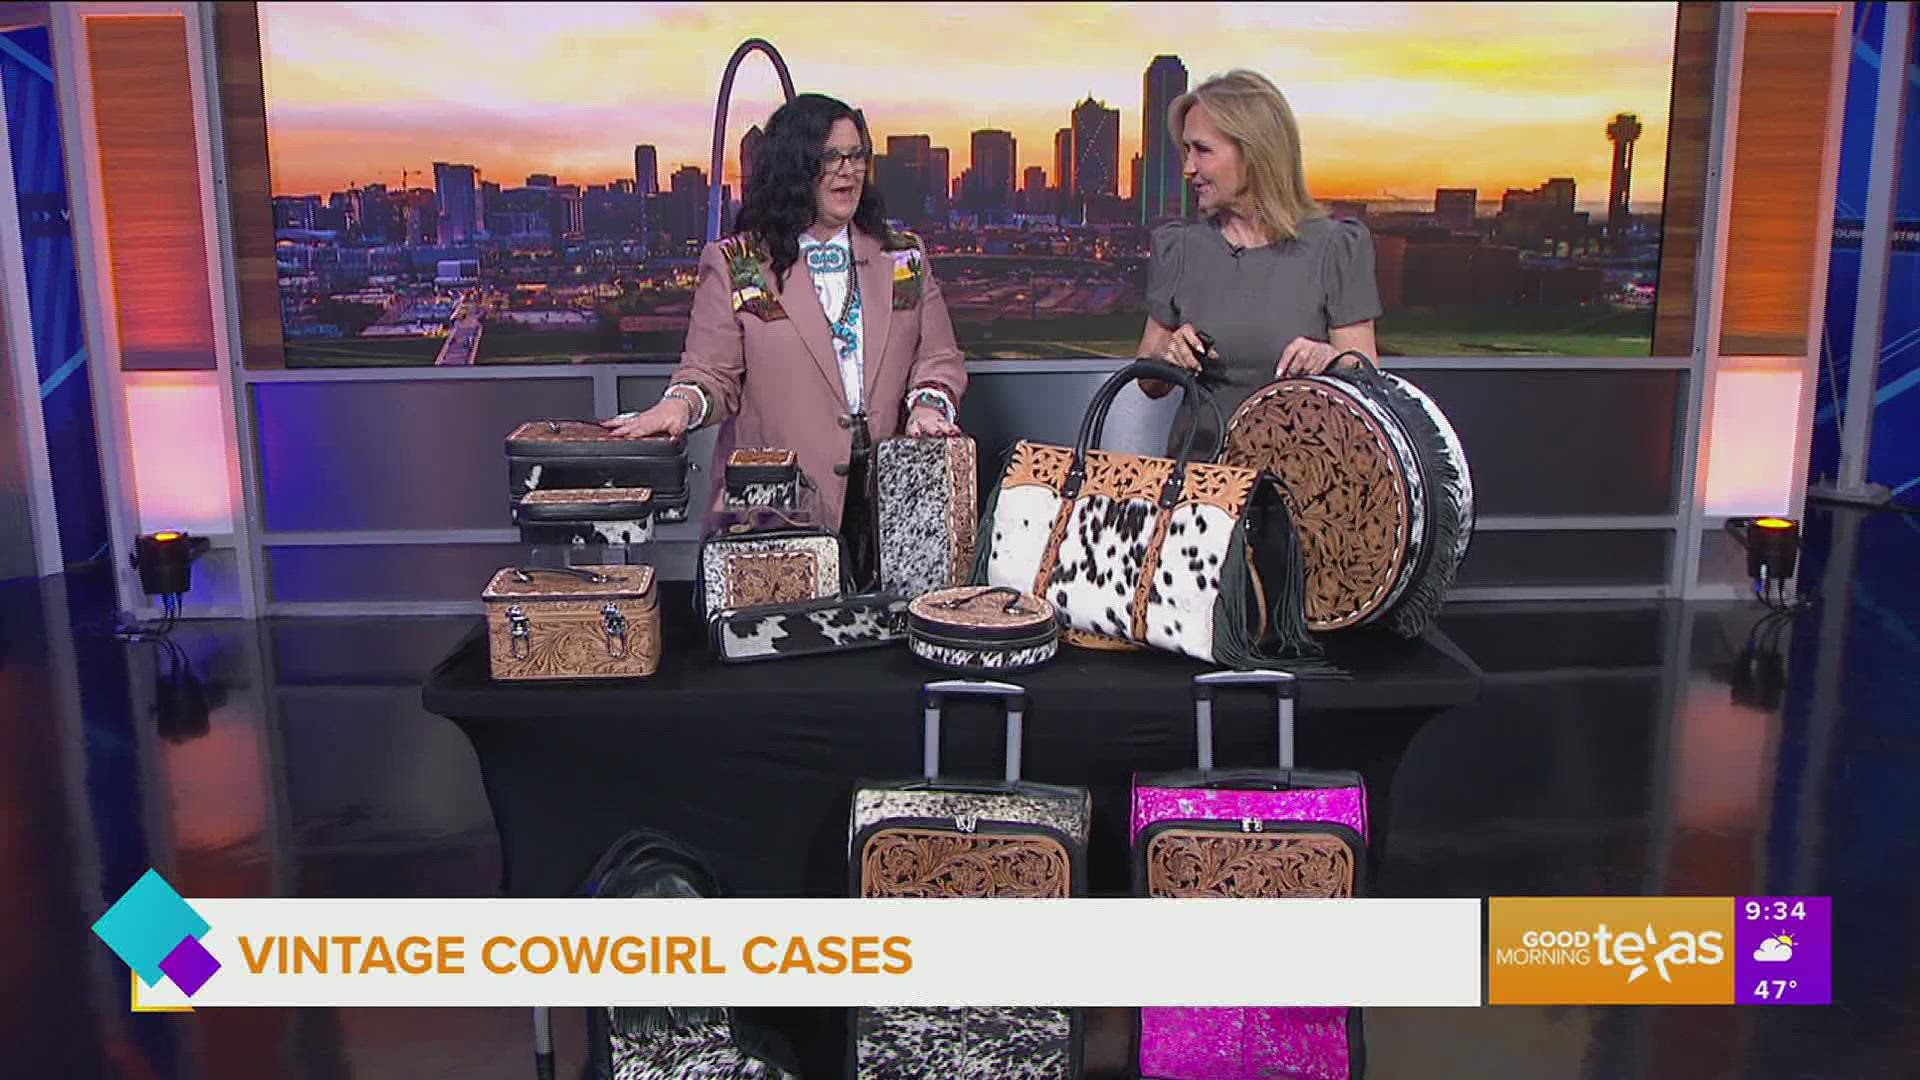 Teresa Johnson shares how she started making Vintage cowgirl cases. Go to vintagecowgirlcases.com for more information.